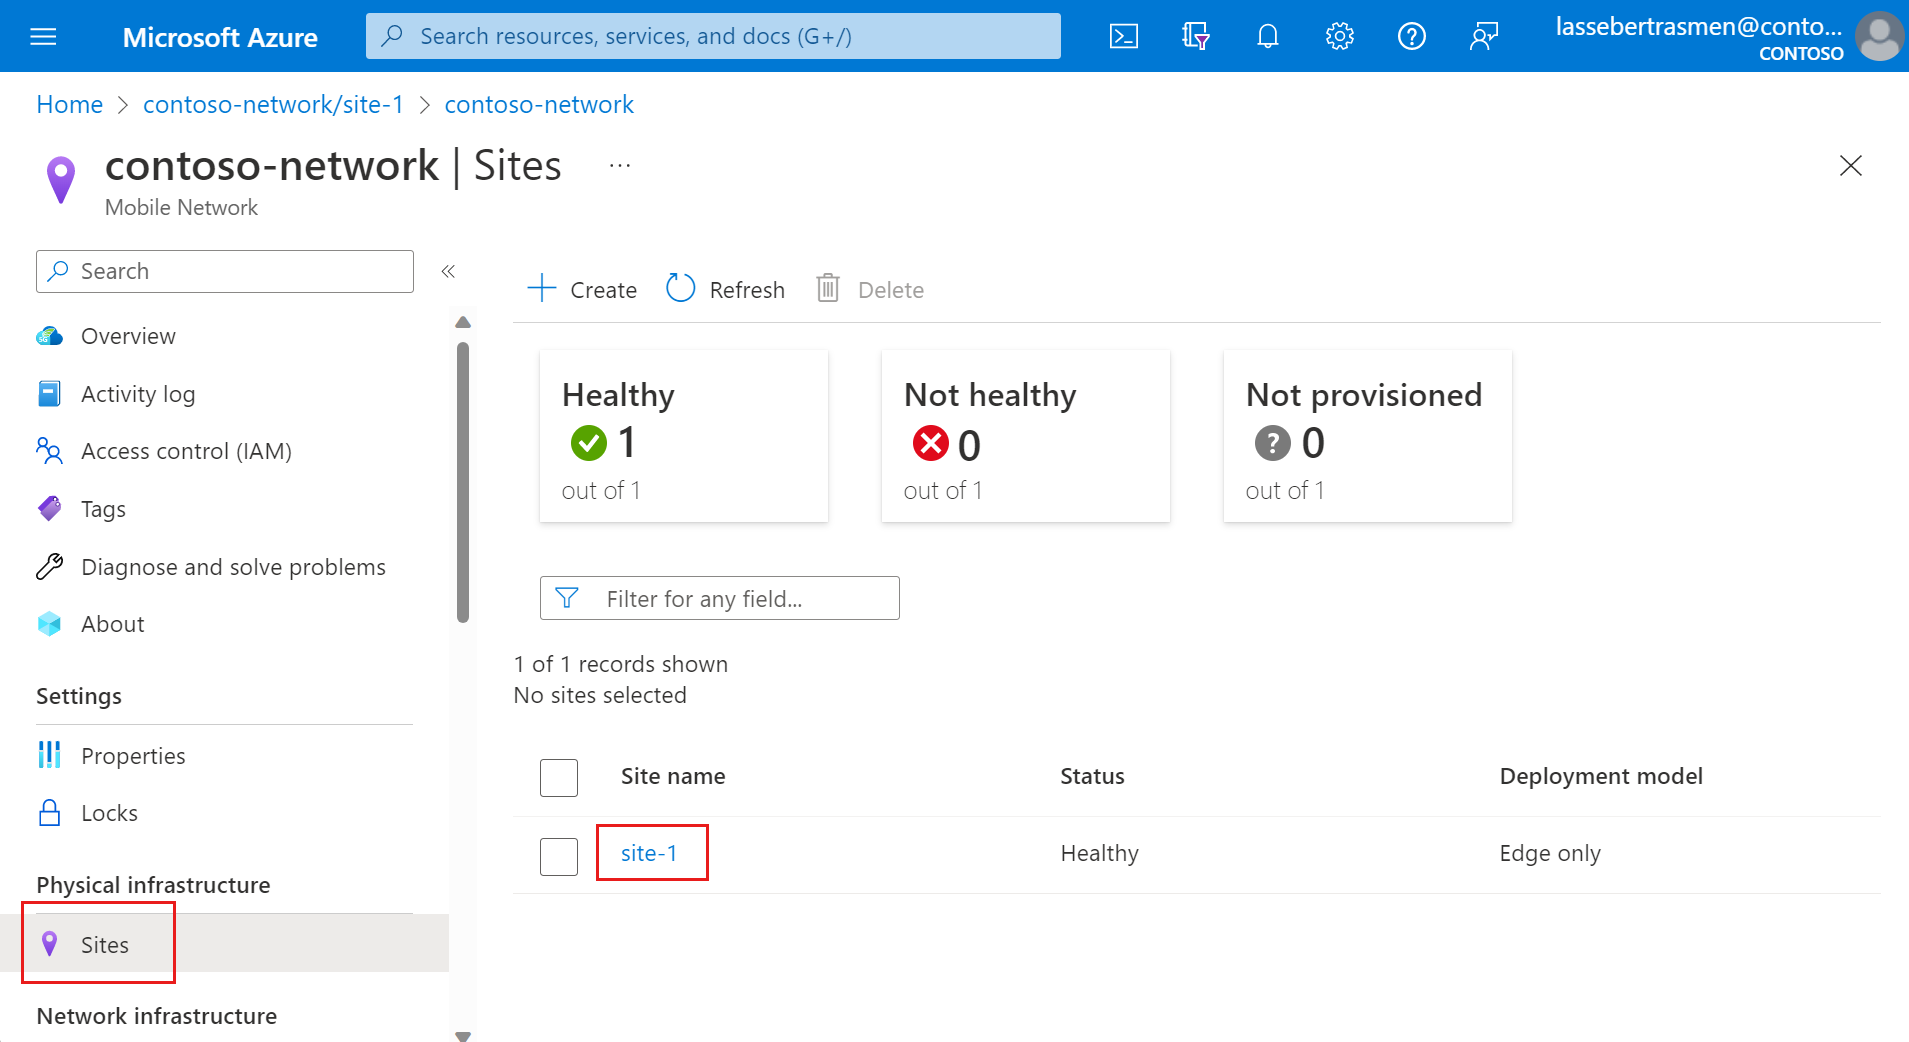 Screenshot of the Azure portal showing the Sites view in the Mobile Network resource.